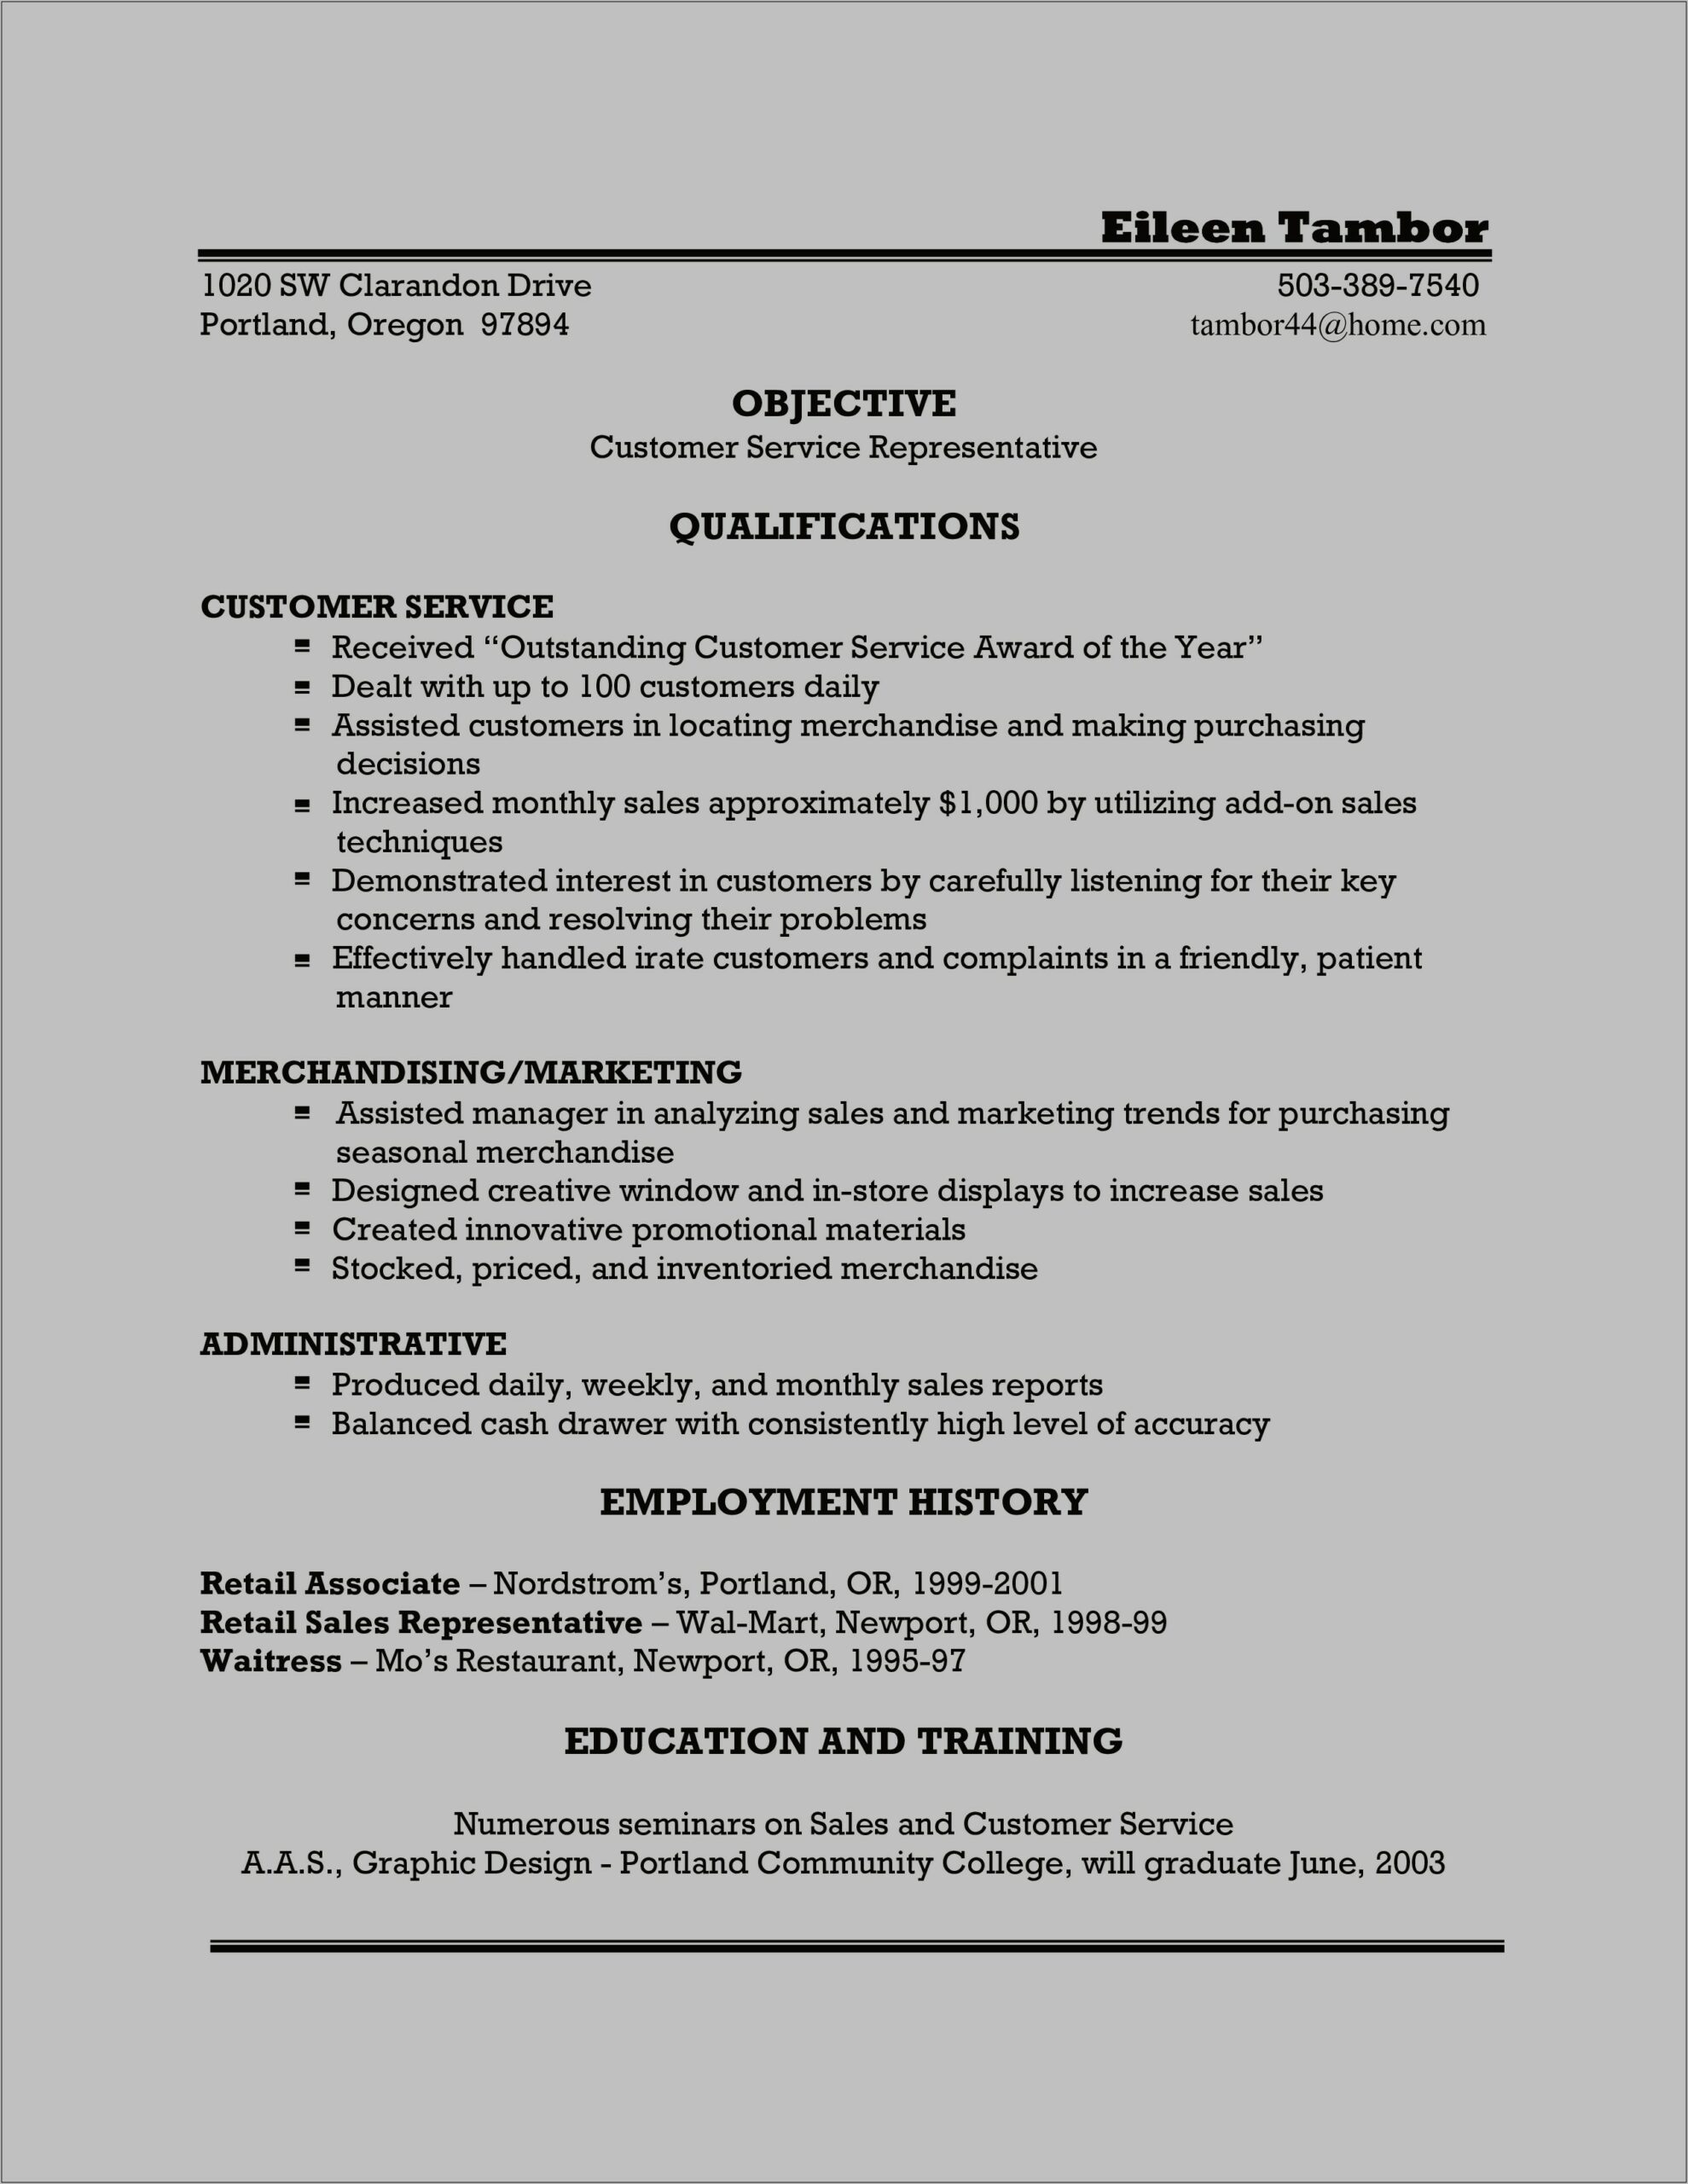 Resume Objective For Higher Education Jobs